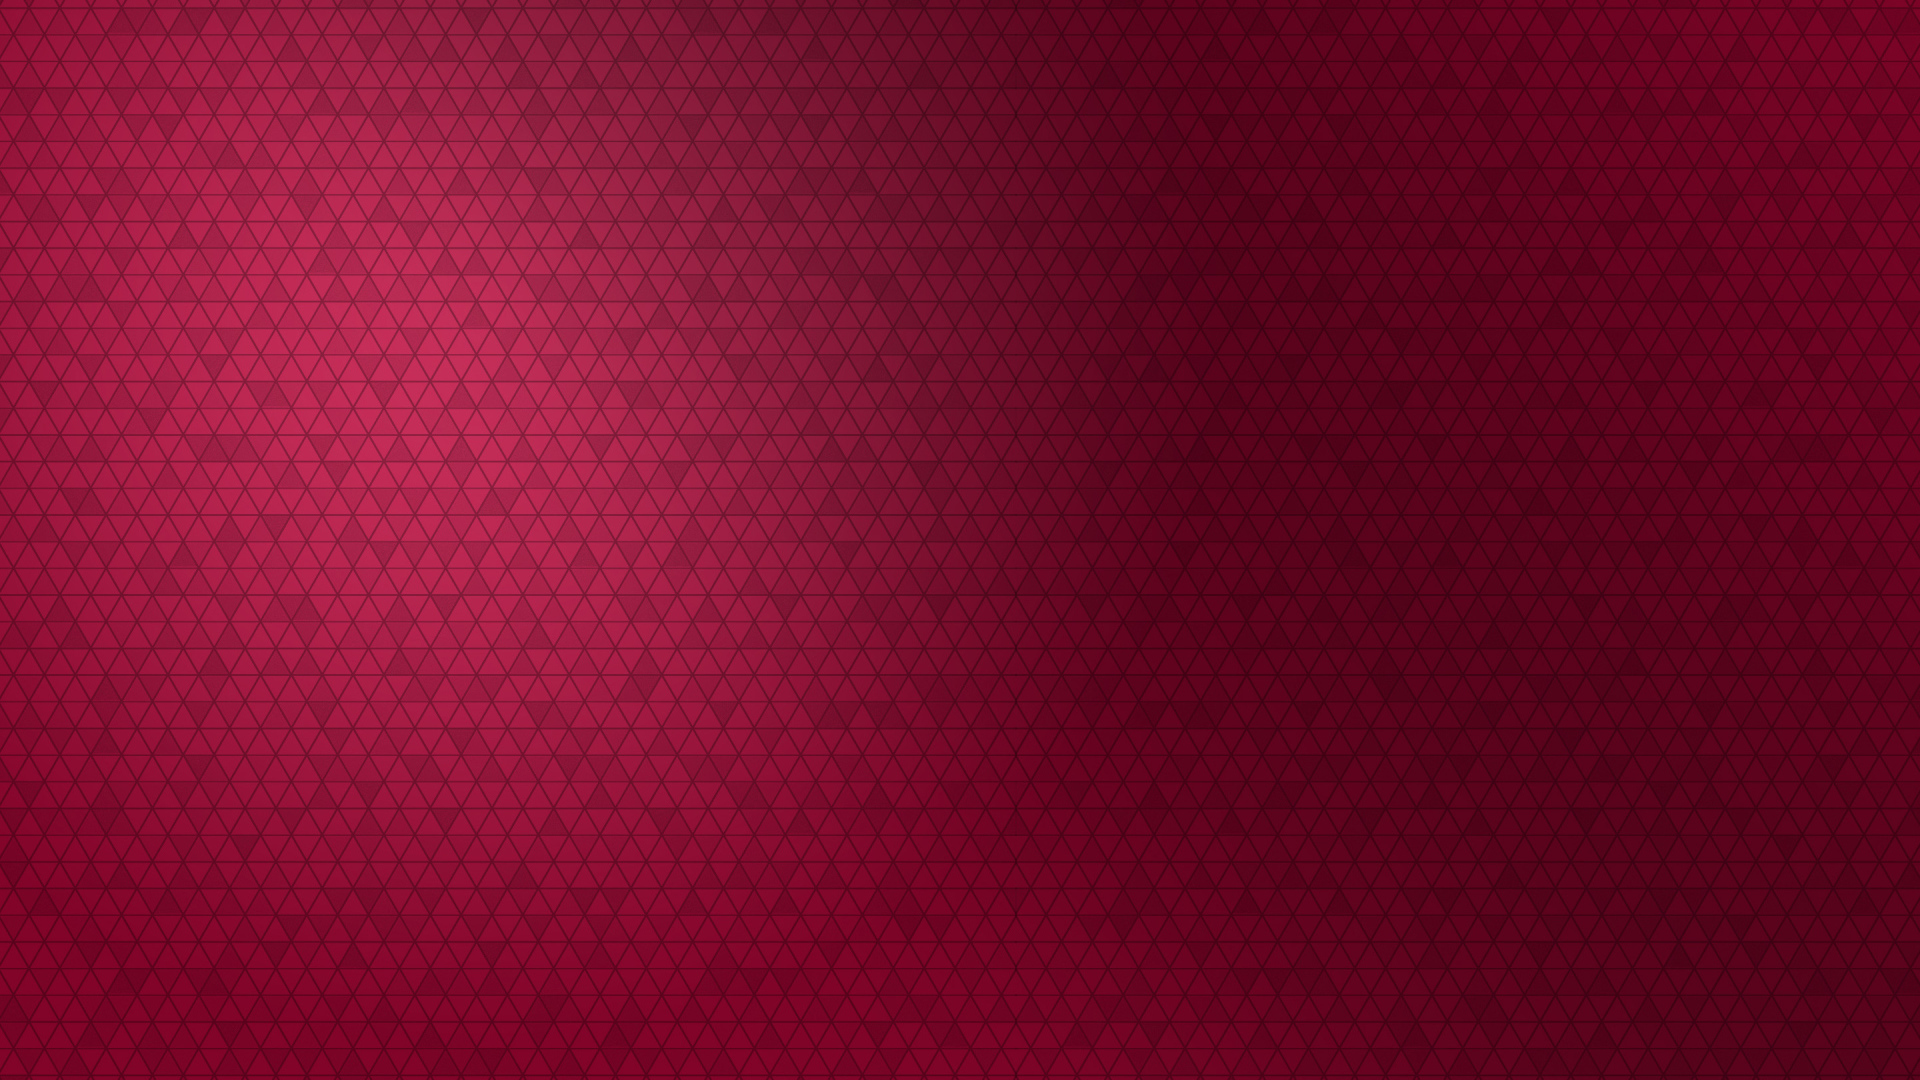 Burgundy Fabric Texture On A Burgundy Background Claret Background  Texture Background Image And Wallpaper for Free Download